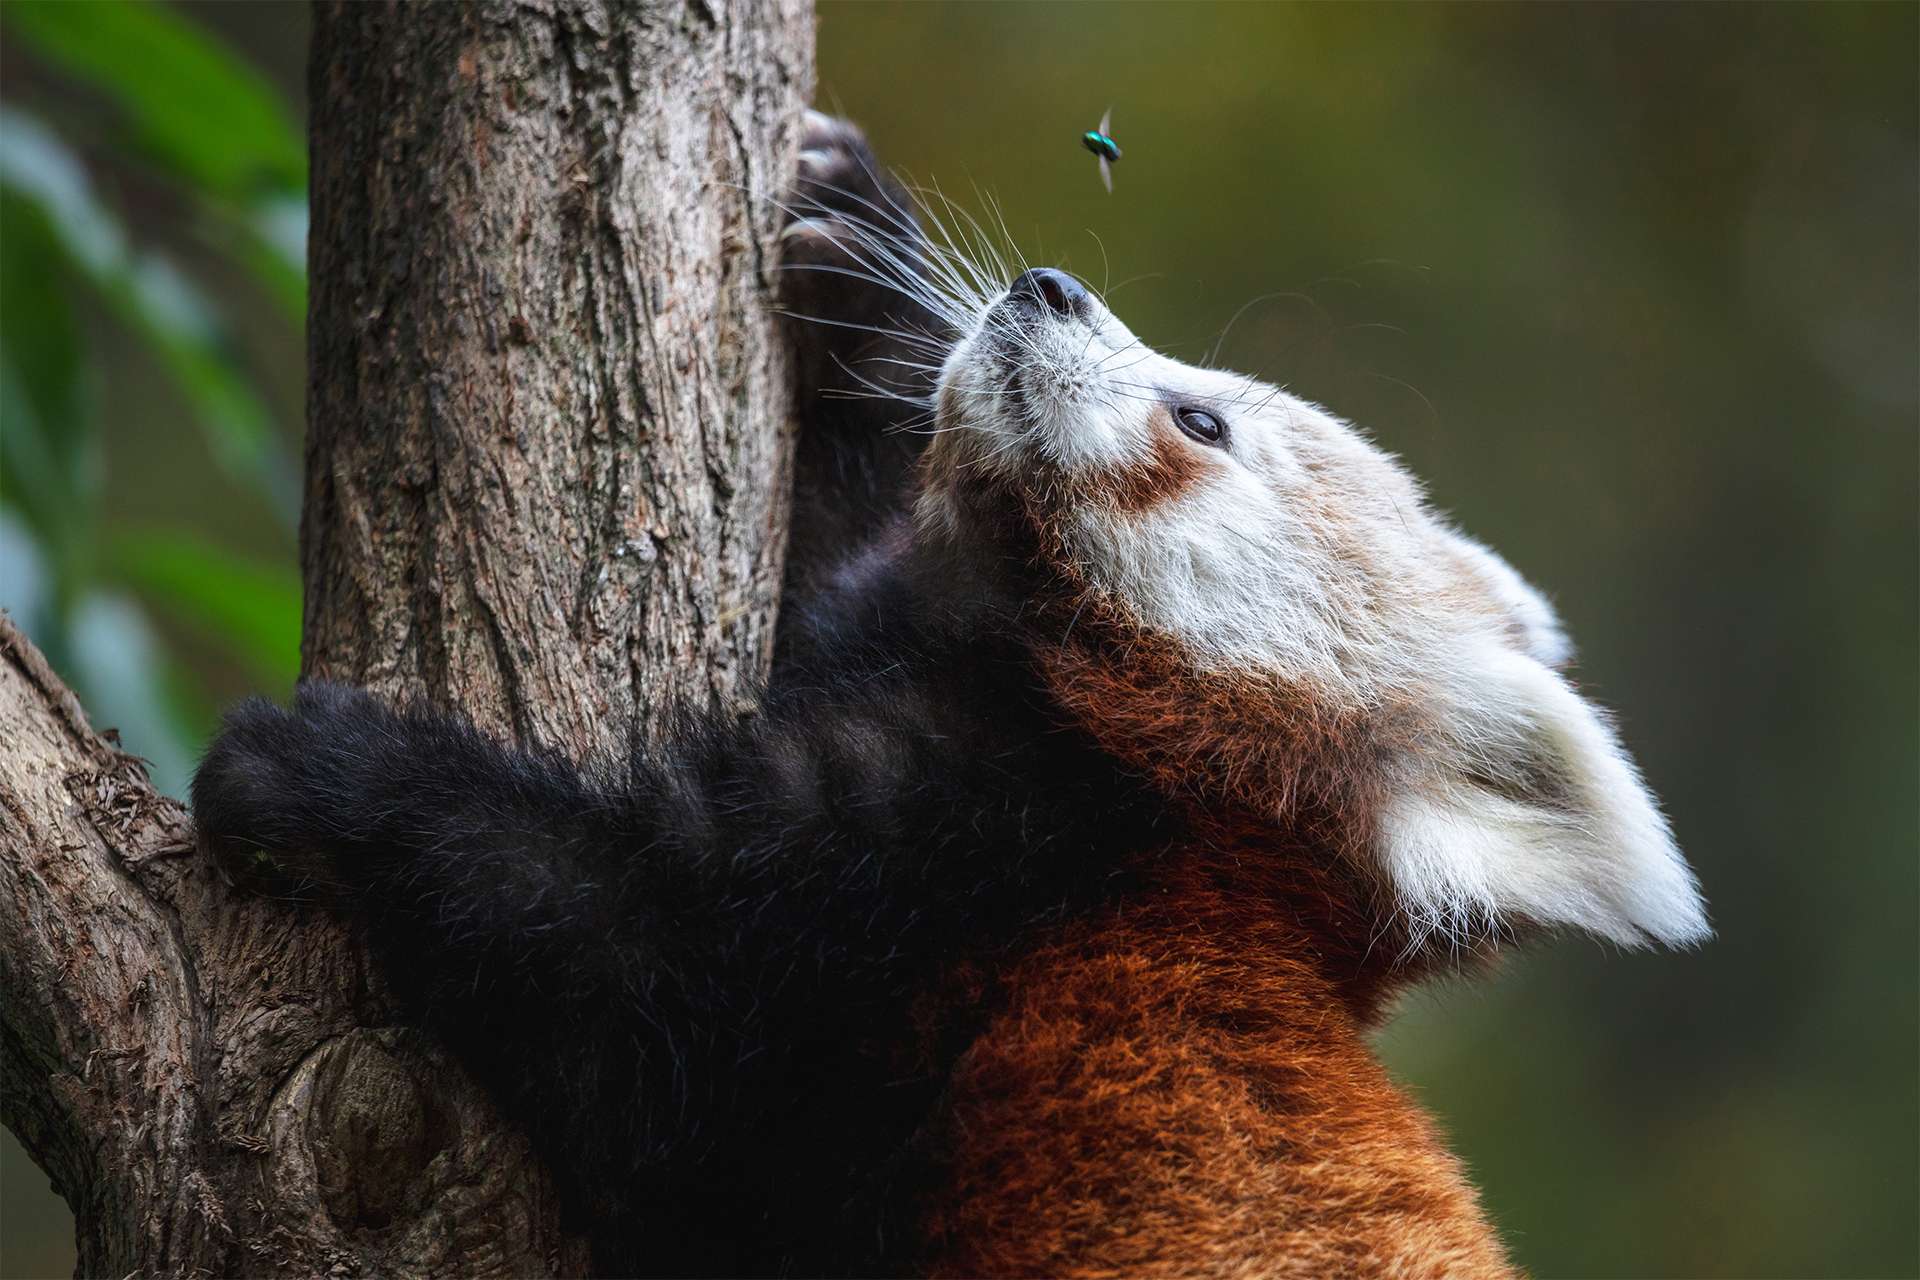 Cute fluffy red panda cub looking at the fly. Young lesser panda or firefox (Ailurus fulgens) climbing a tree.